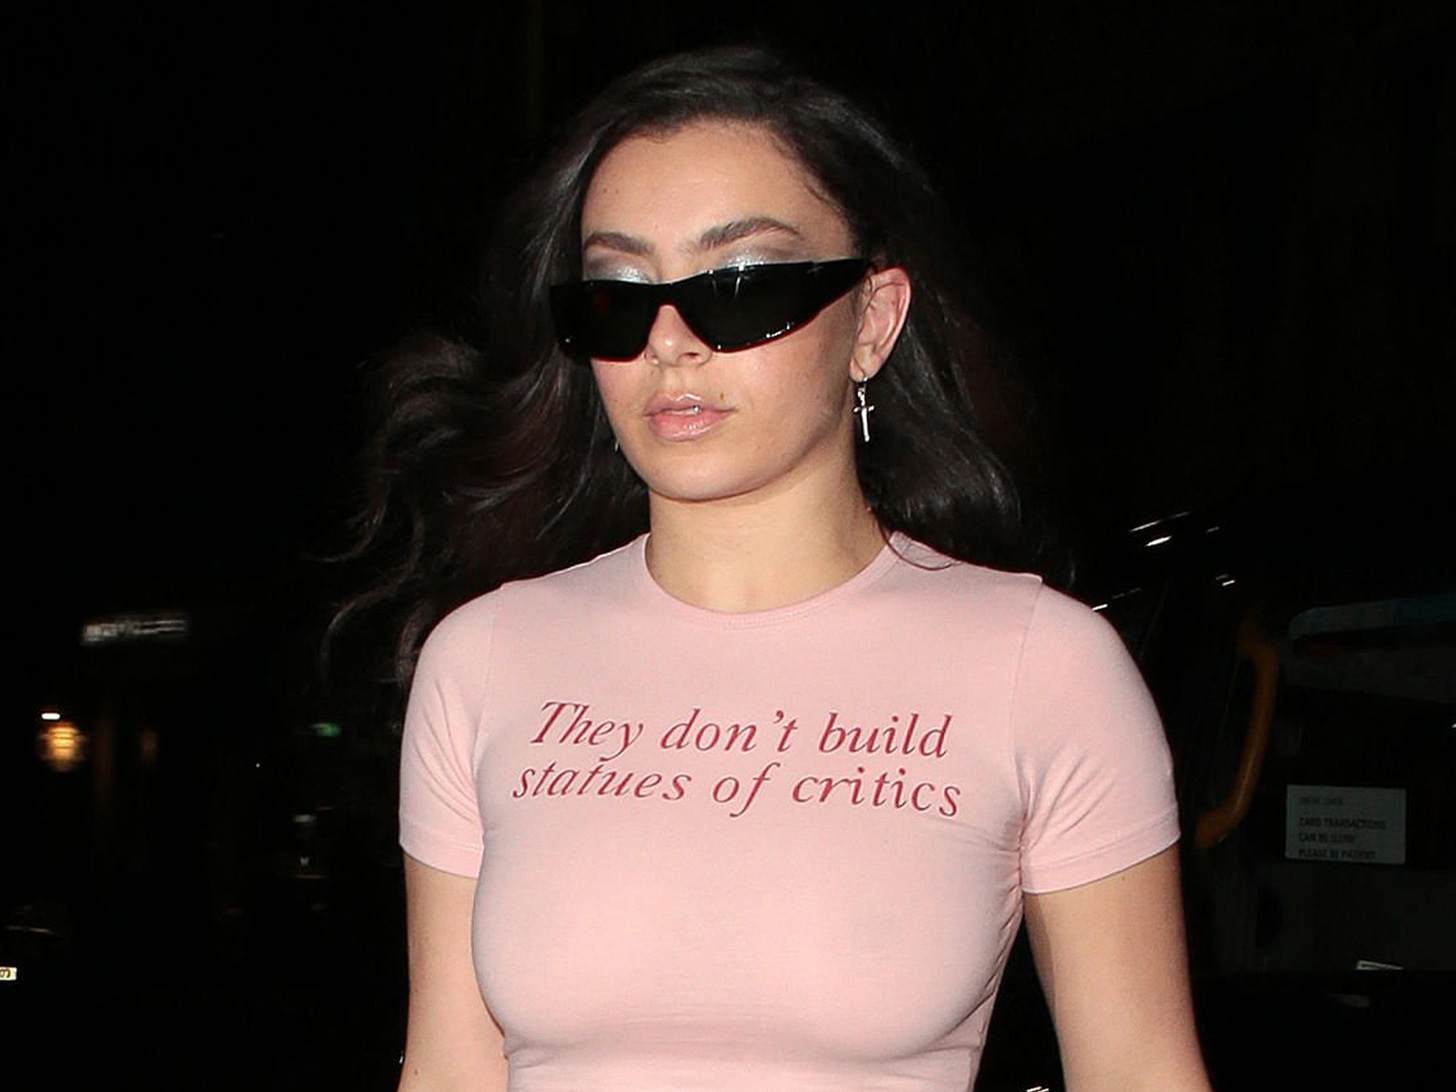 Charli XCX's Baby Tee Sent a Not-so-Subtle Message to Critics | Glamour